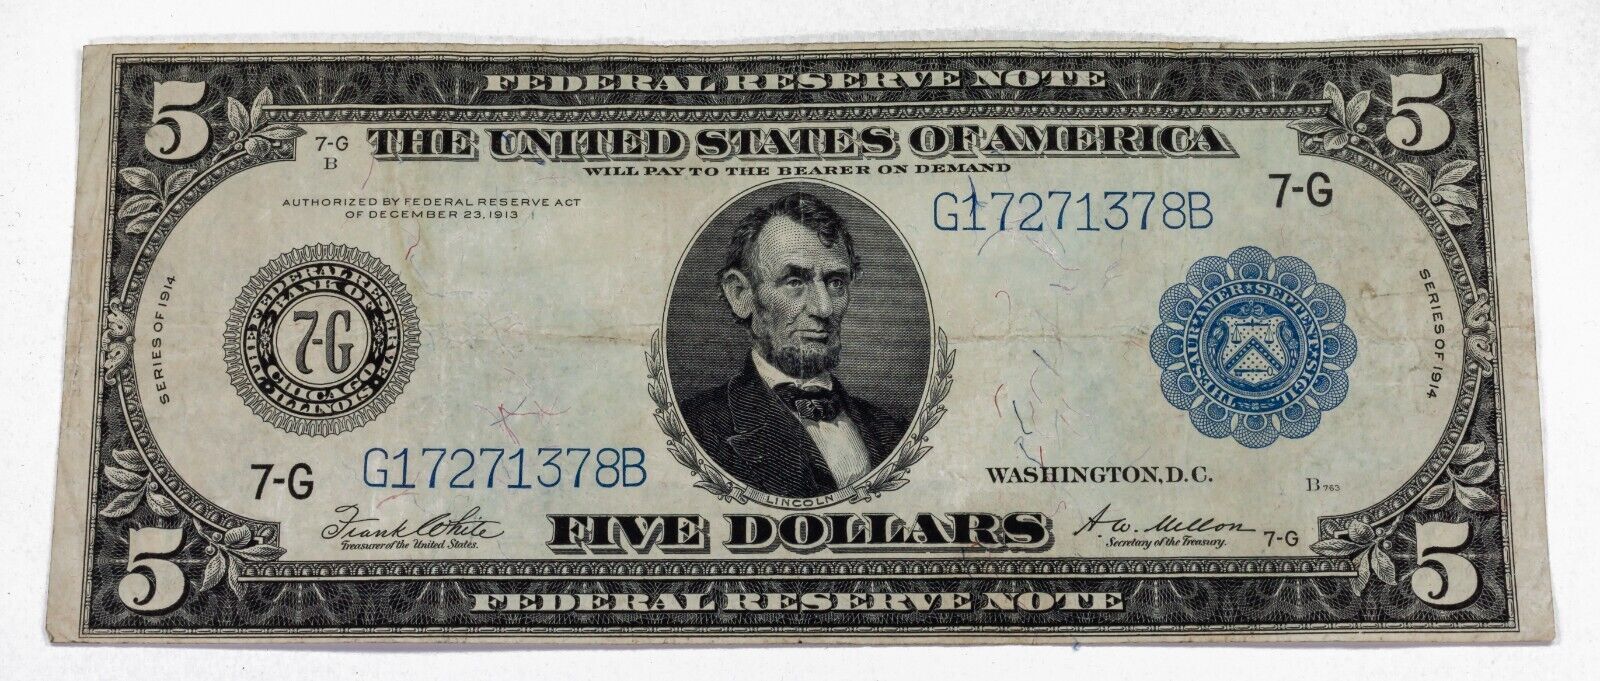 Primary image for Series of 1914 $5 Federal Reserve Note in Extra Fine XF Condition FR #871A